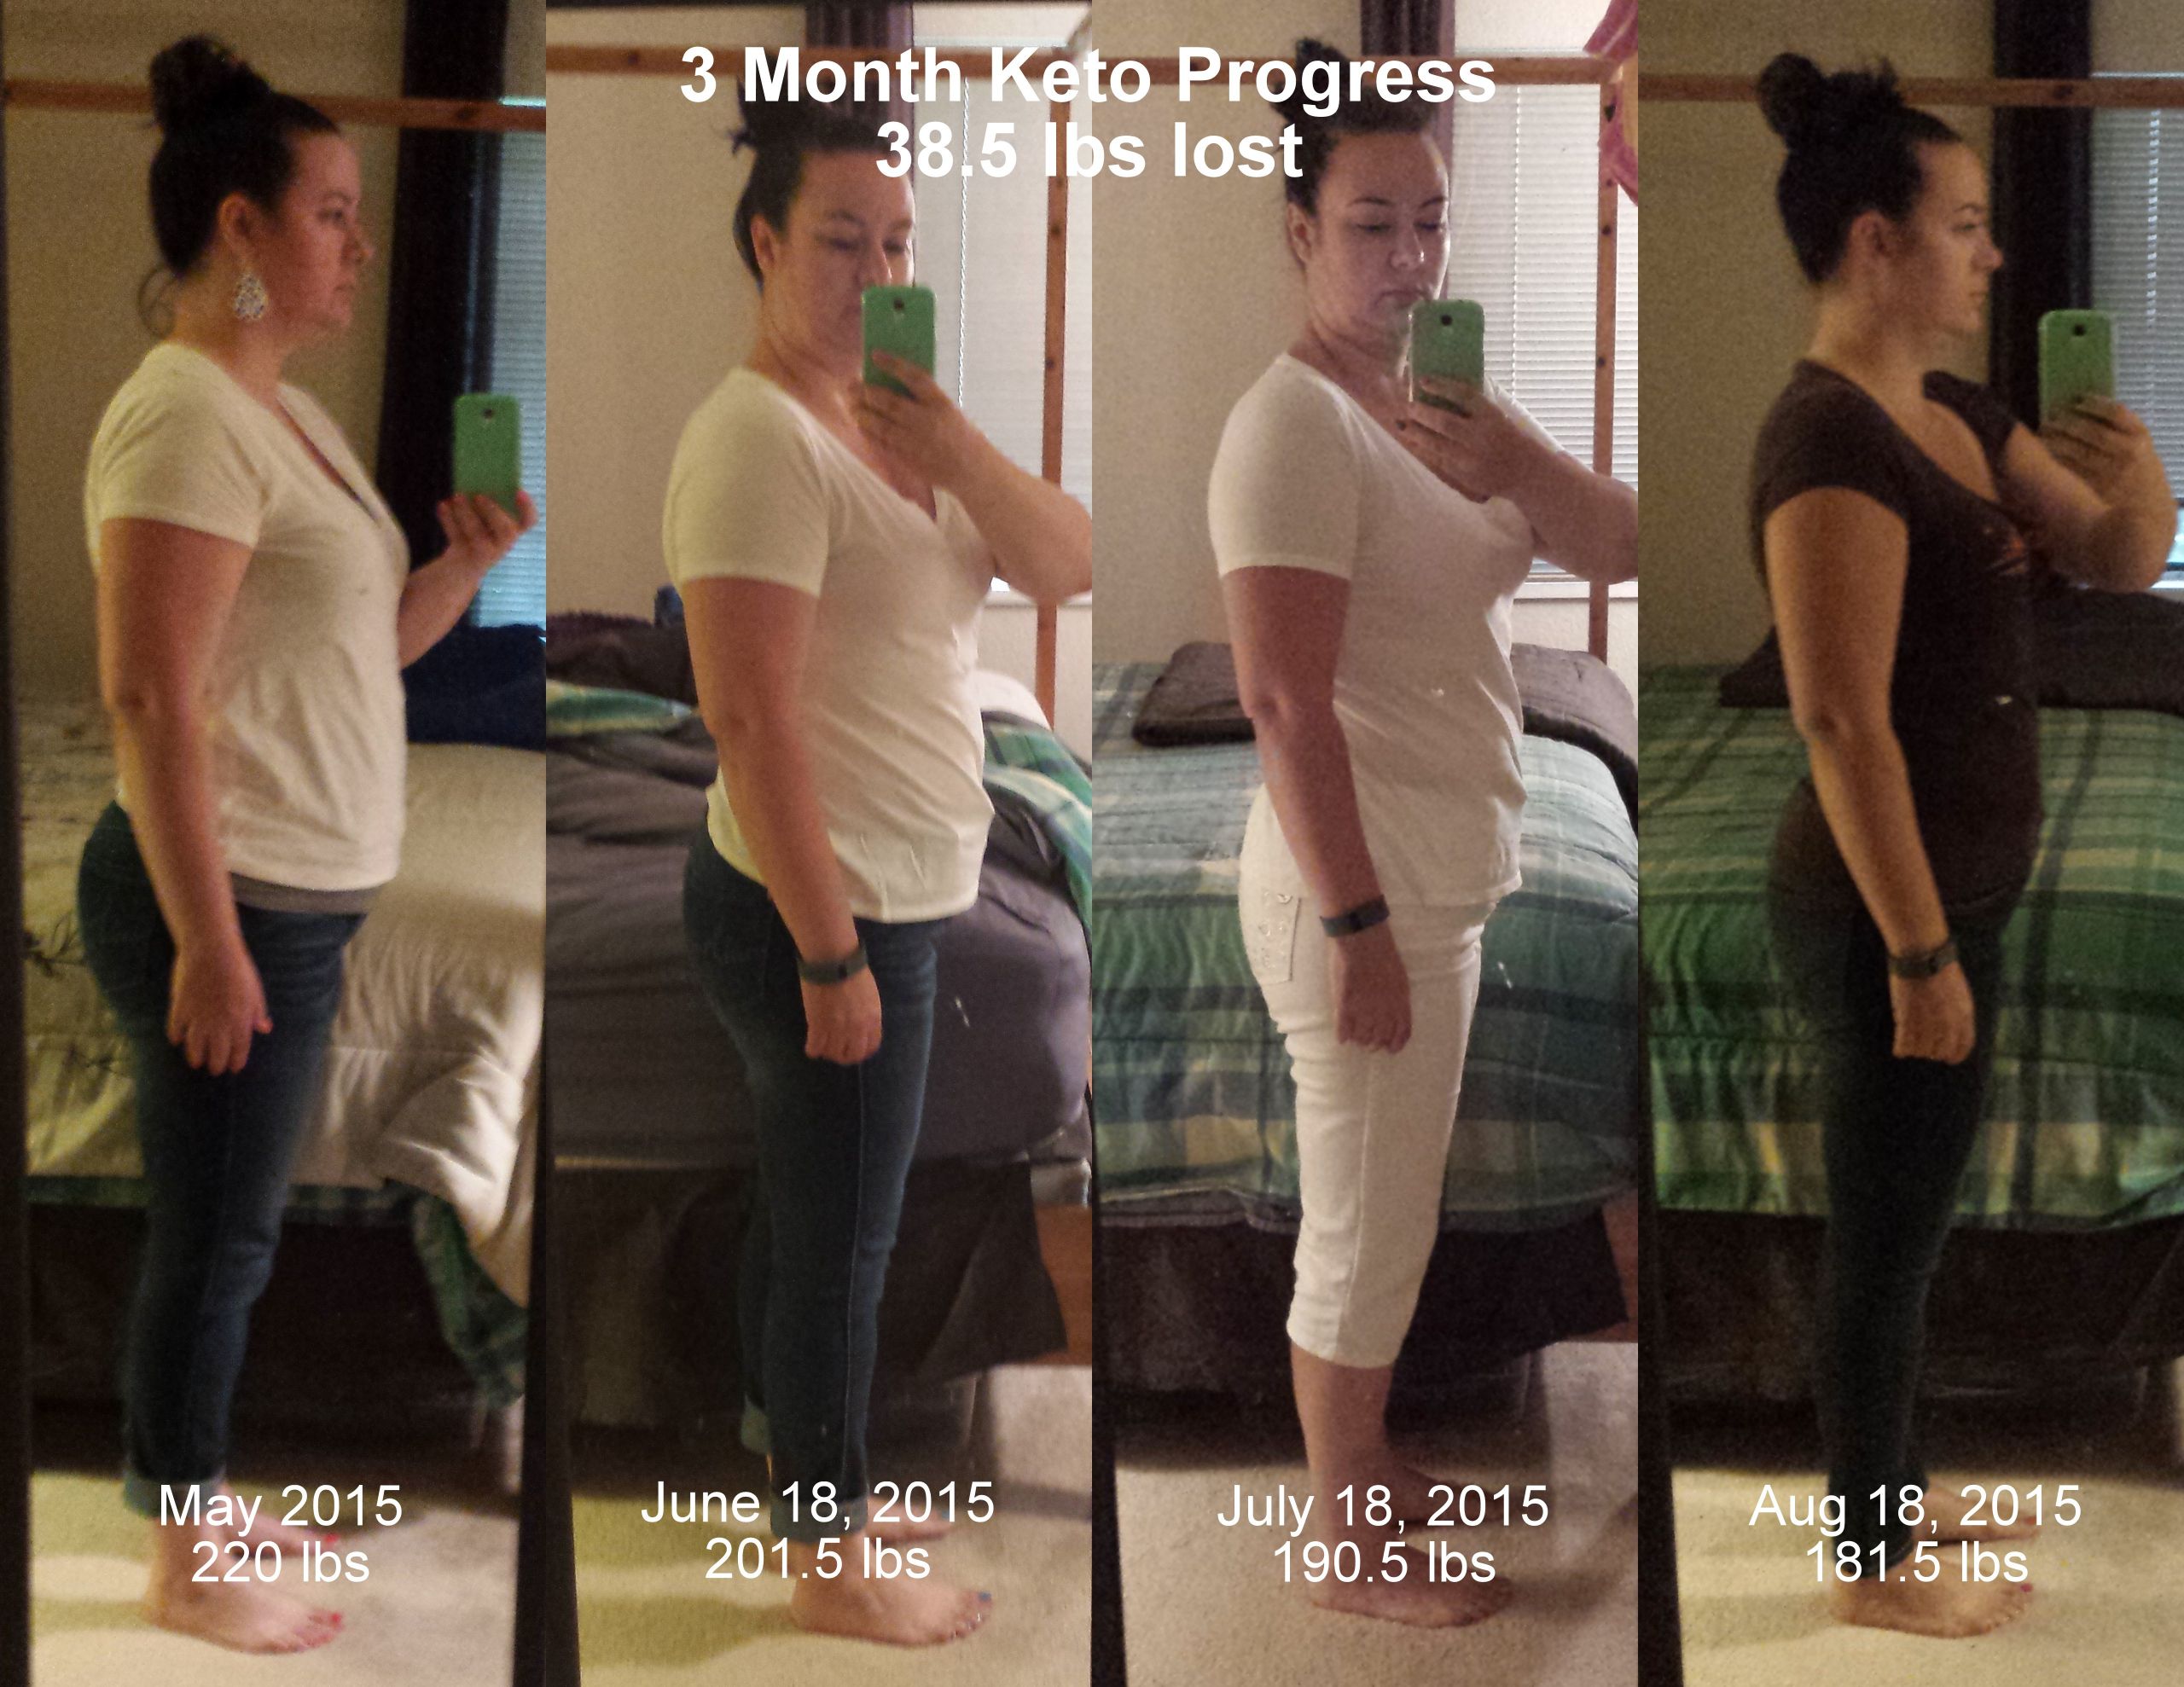 The Keto Diet Before And After 3 Month Update on My Ketogenic Diet Experiment